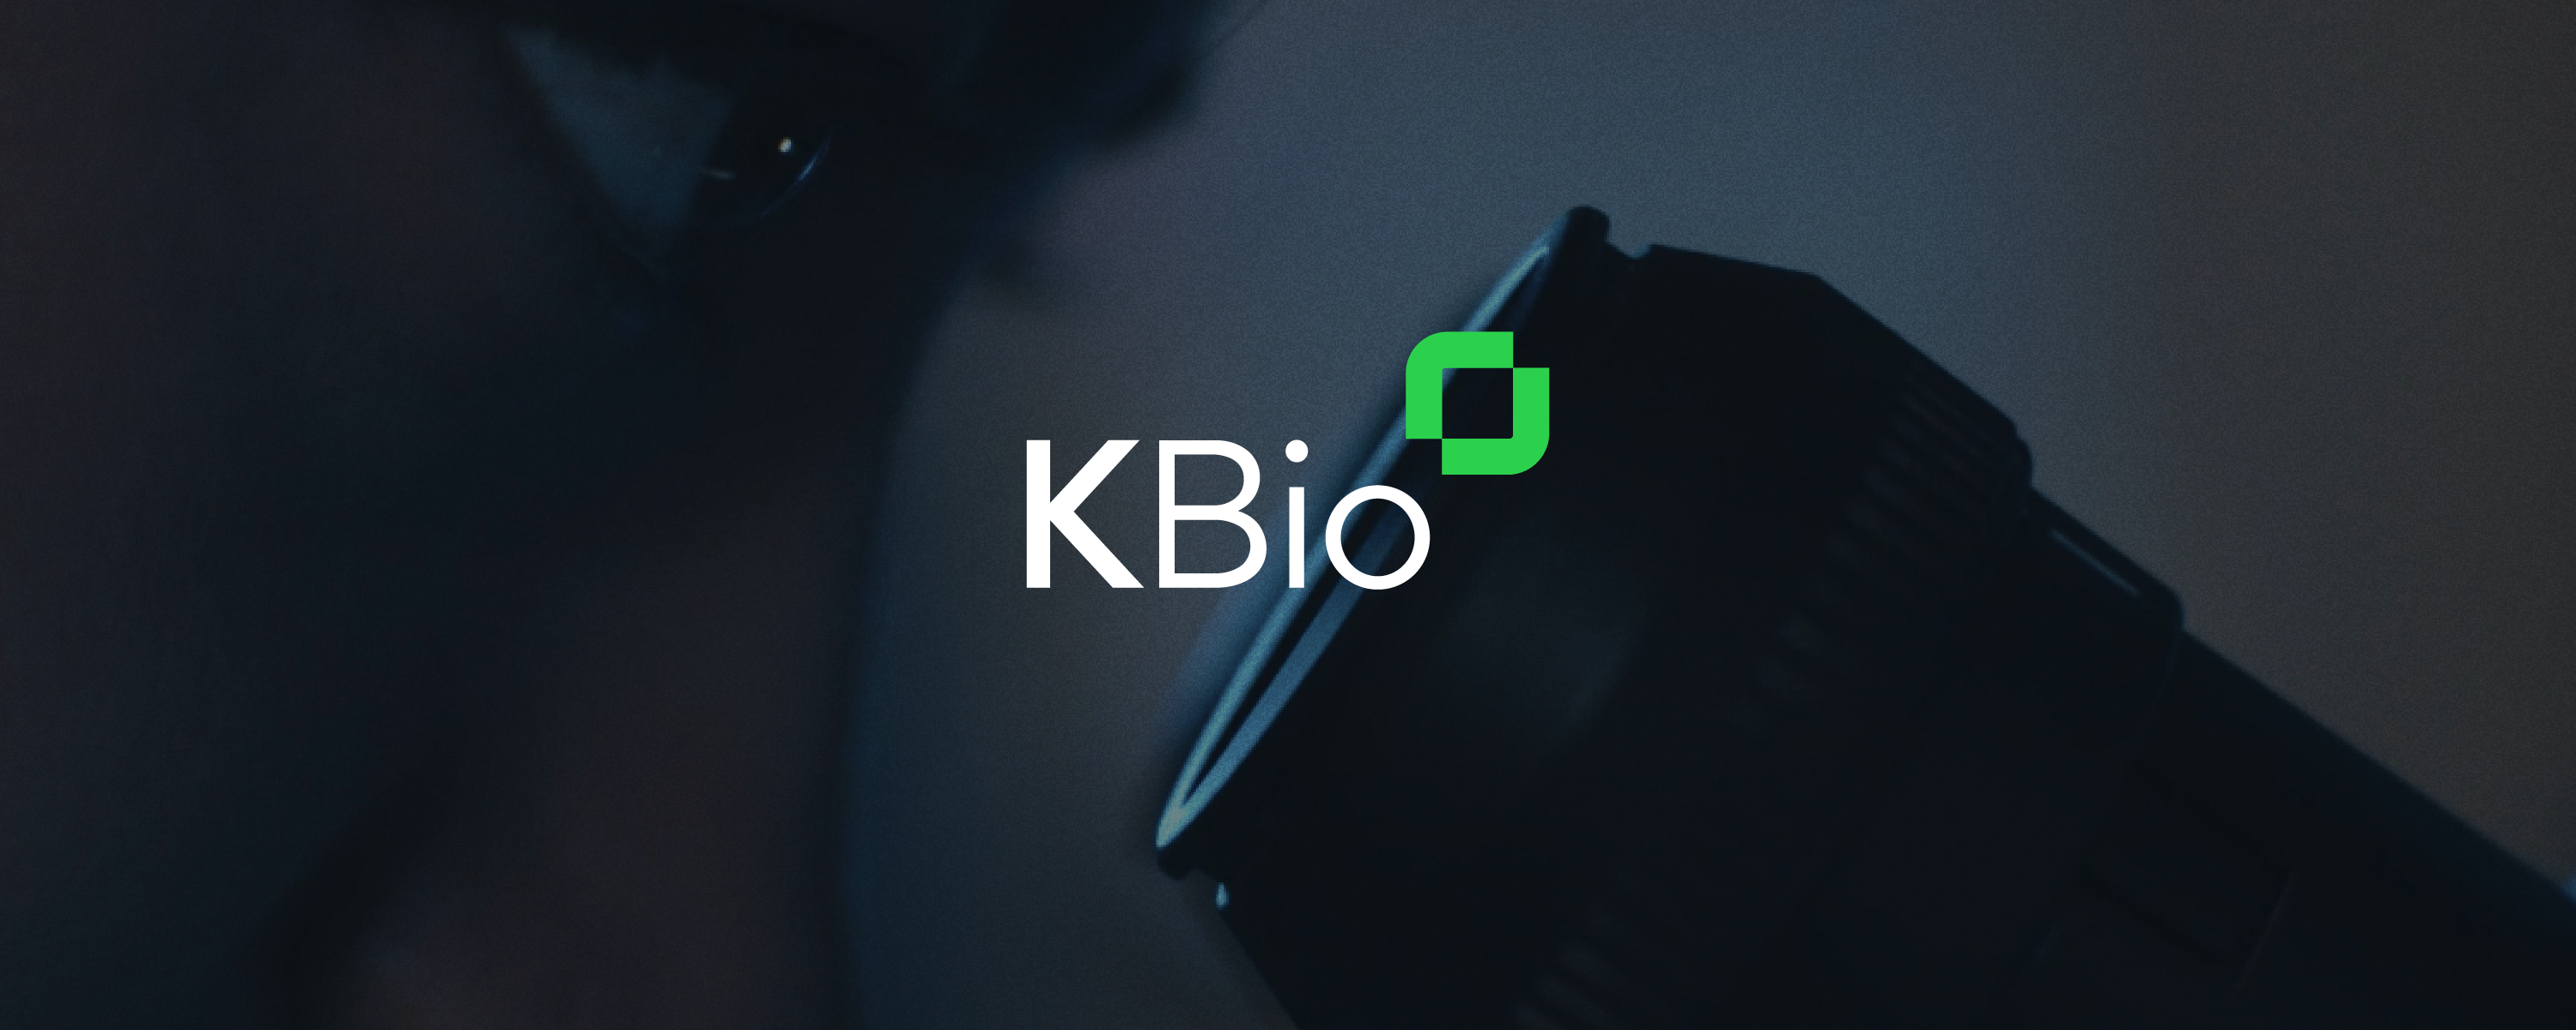 Featured image for “KBio”